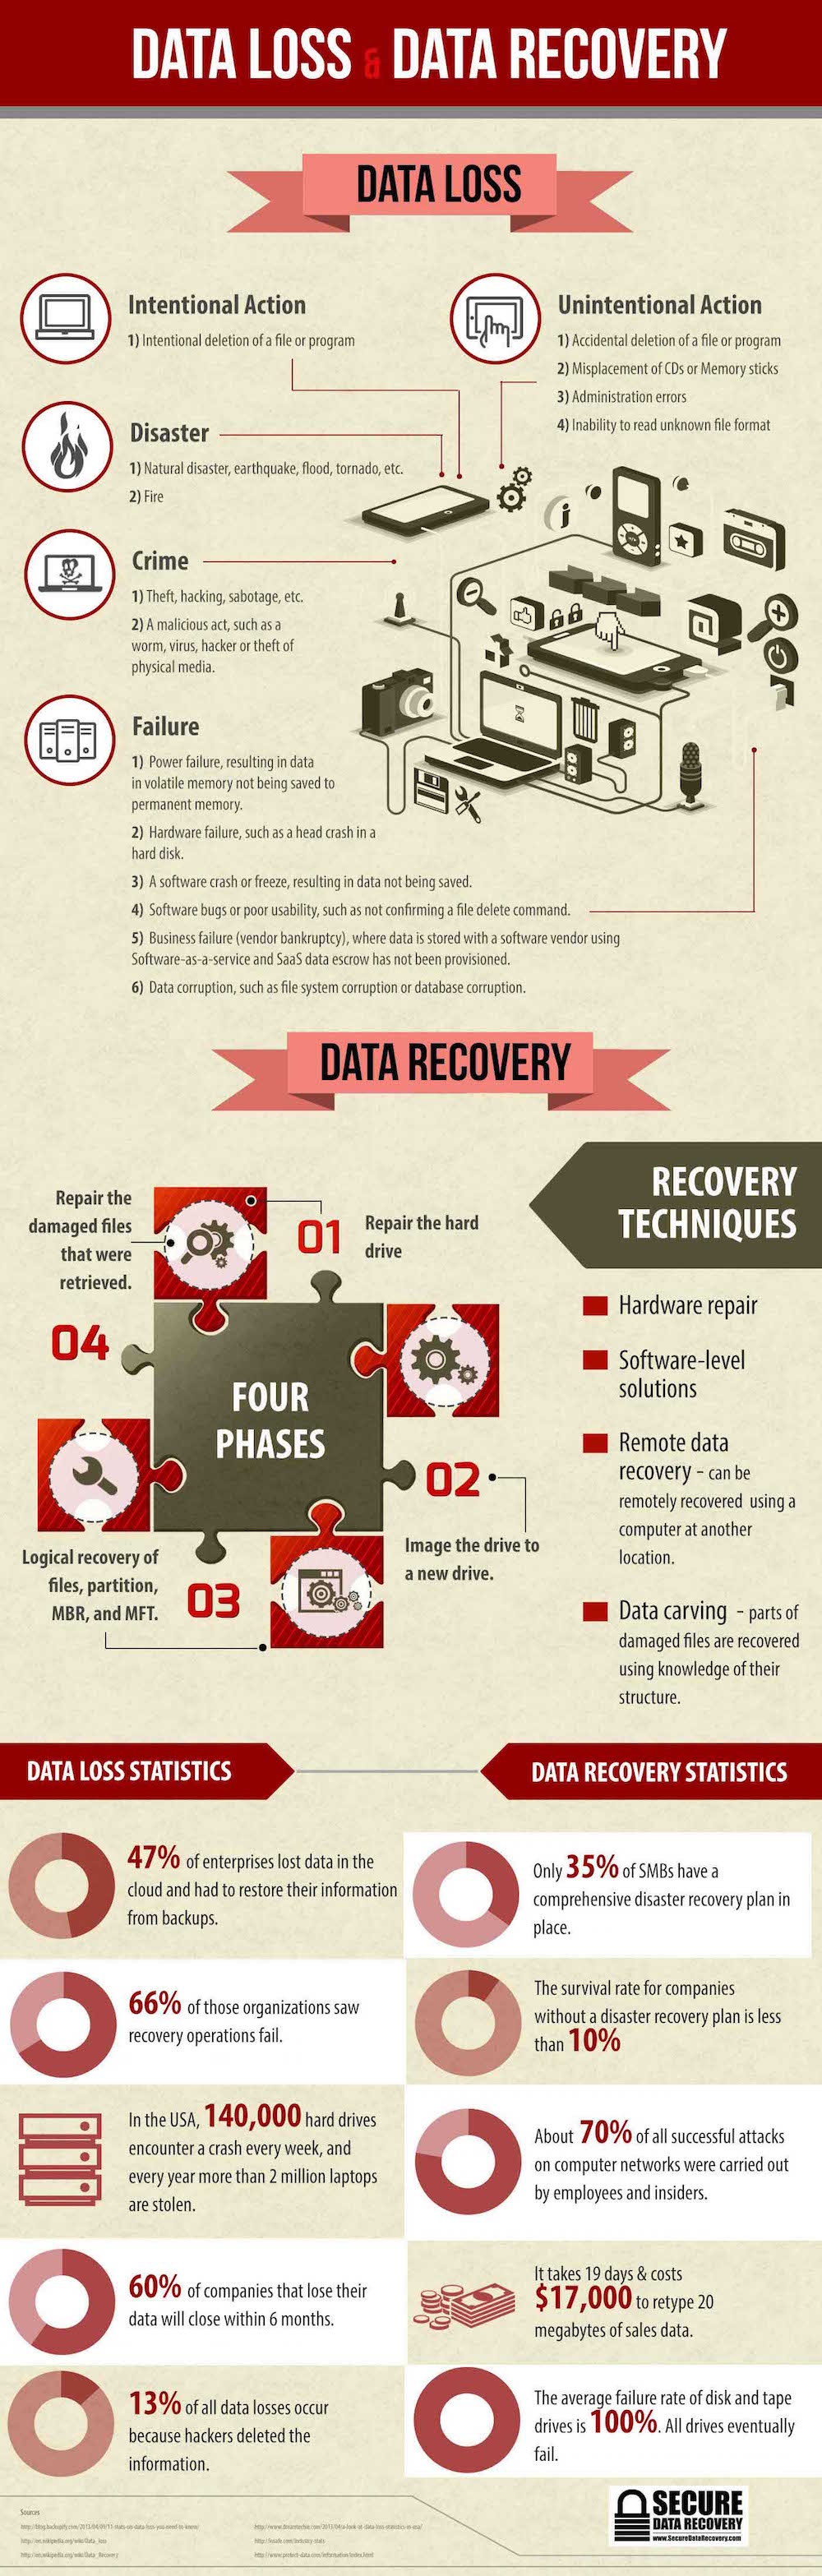 data-loss-data-recovery_infographic-here